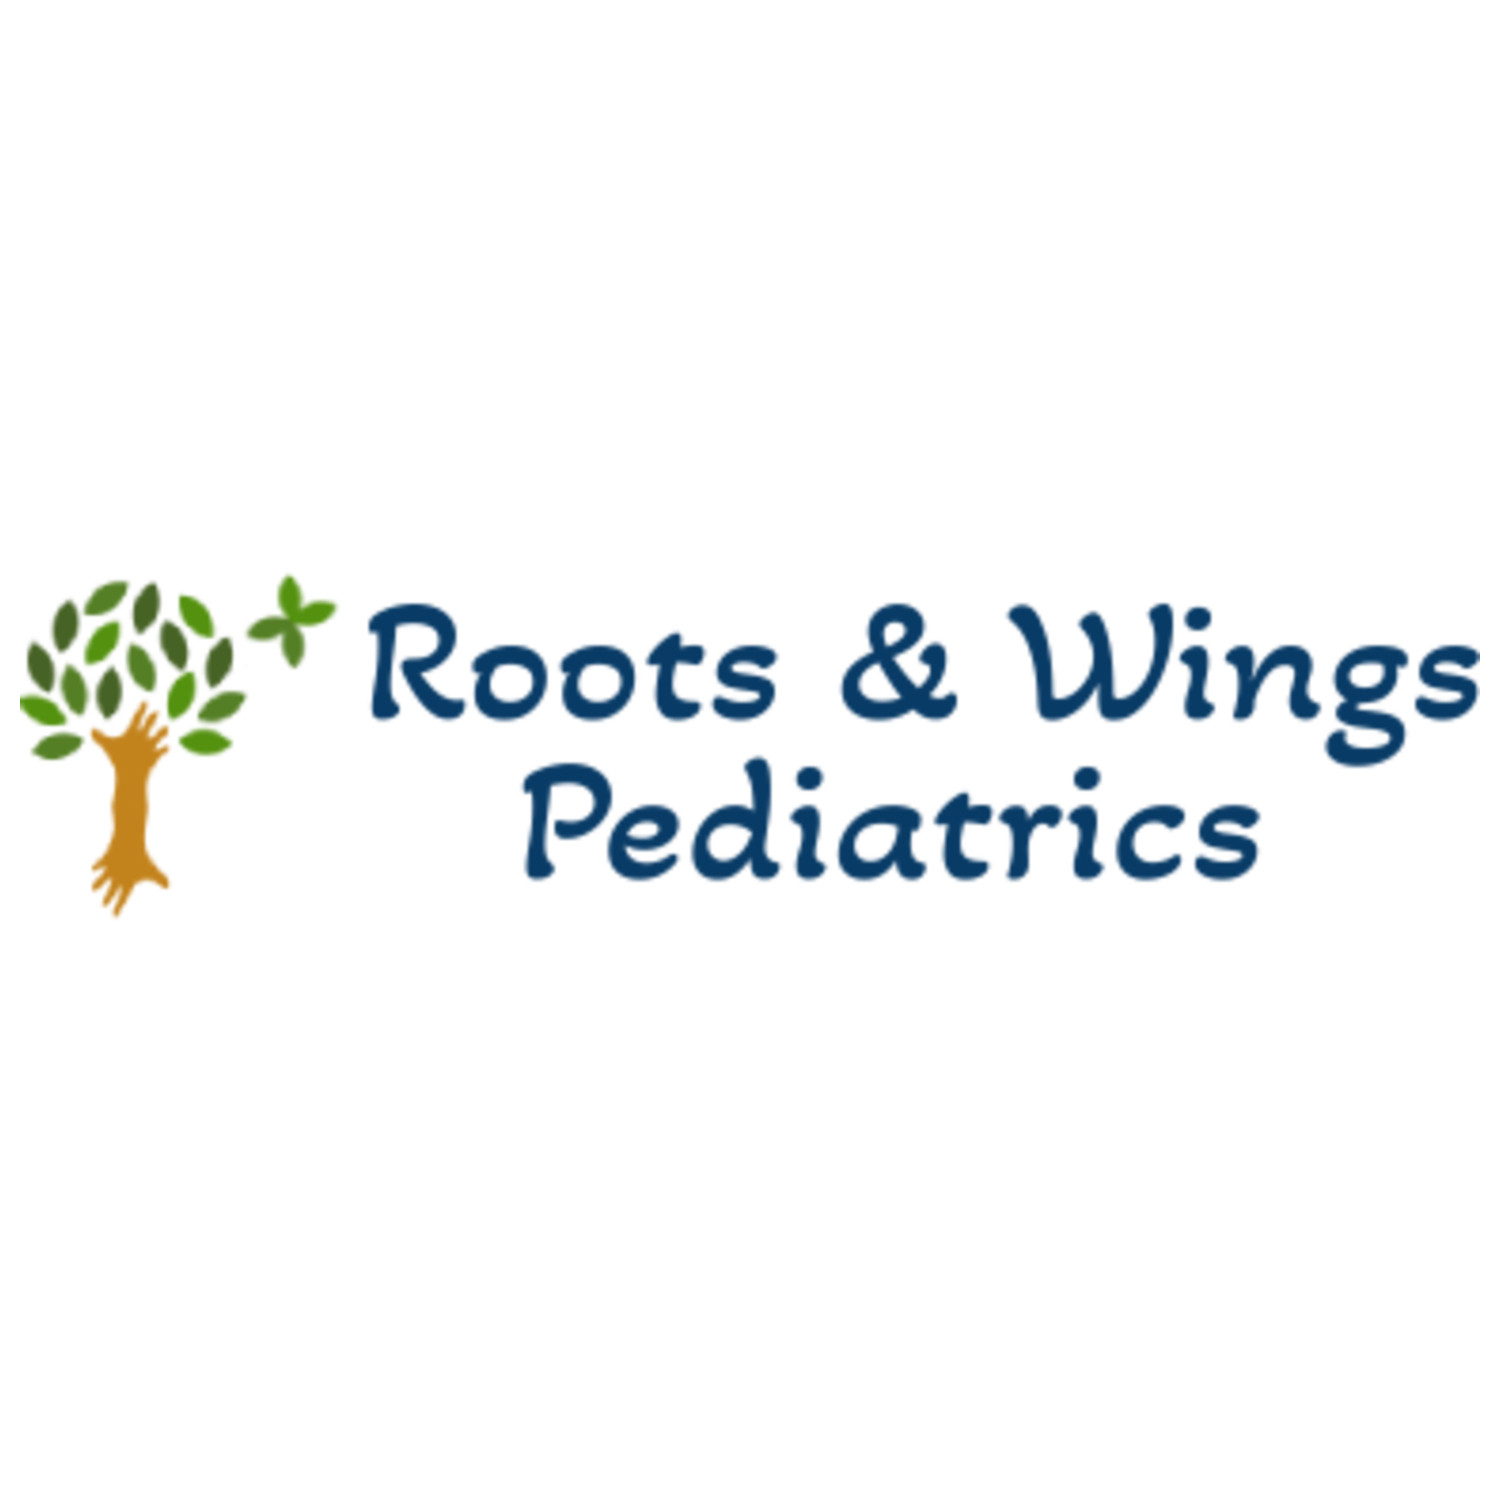 Roots & Wings Pediatrics with Dr. Catherine Sinclair